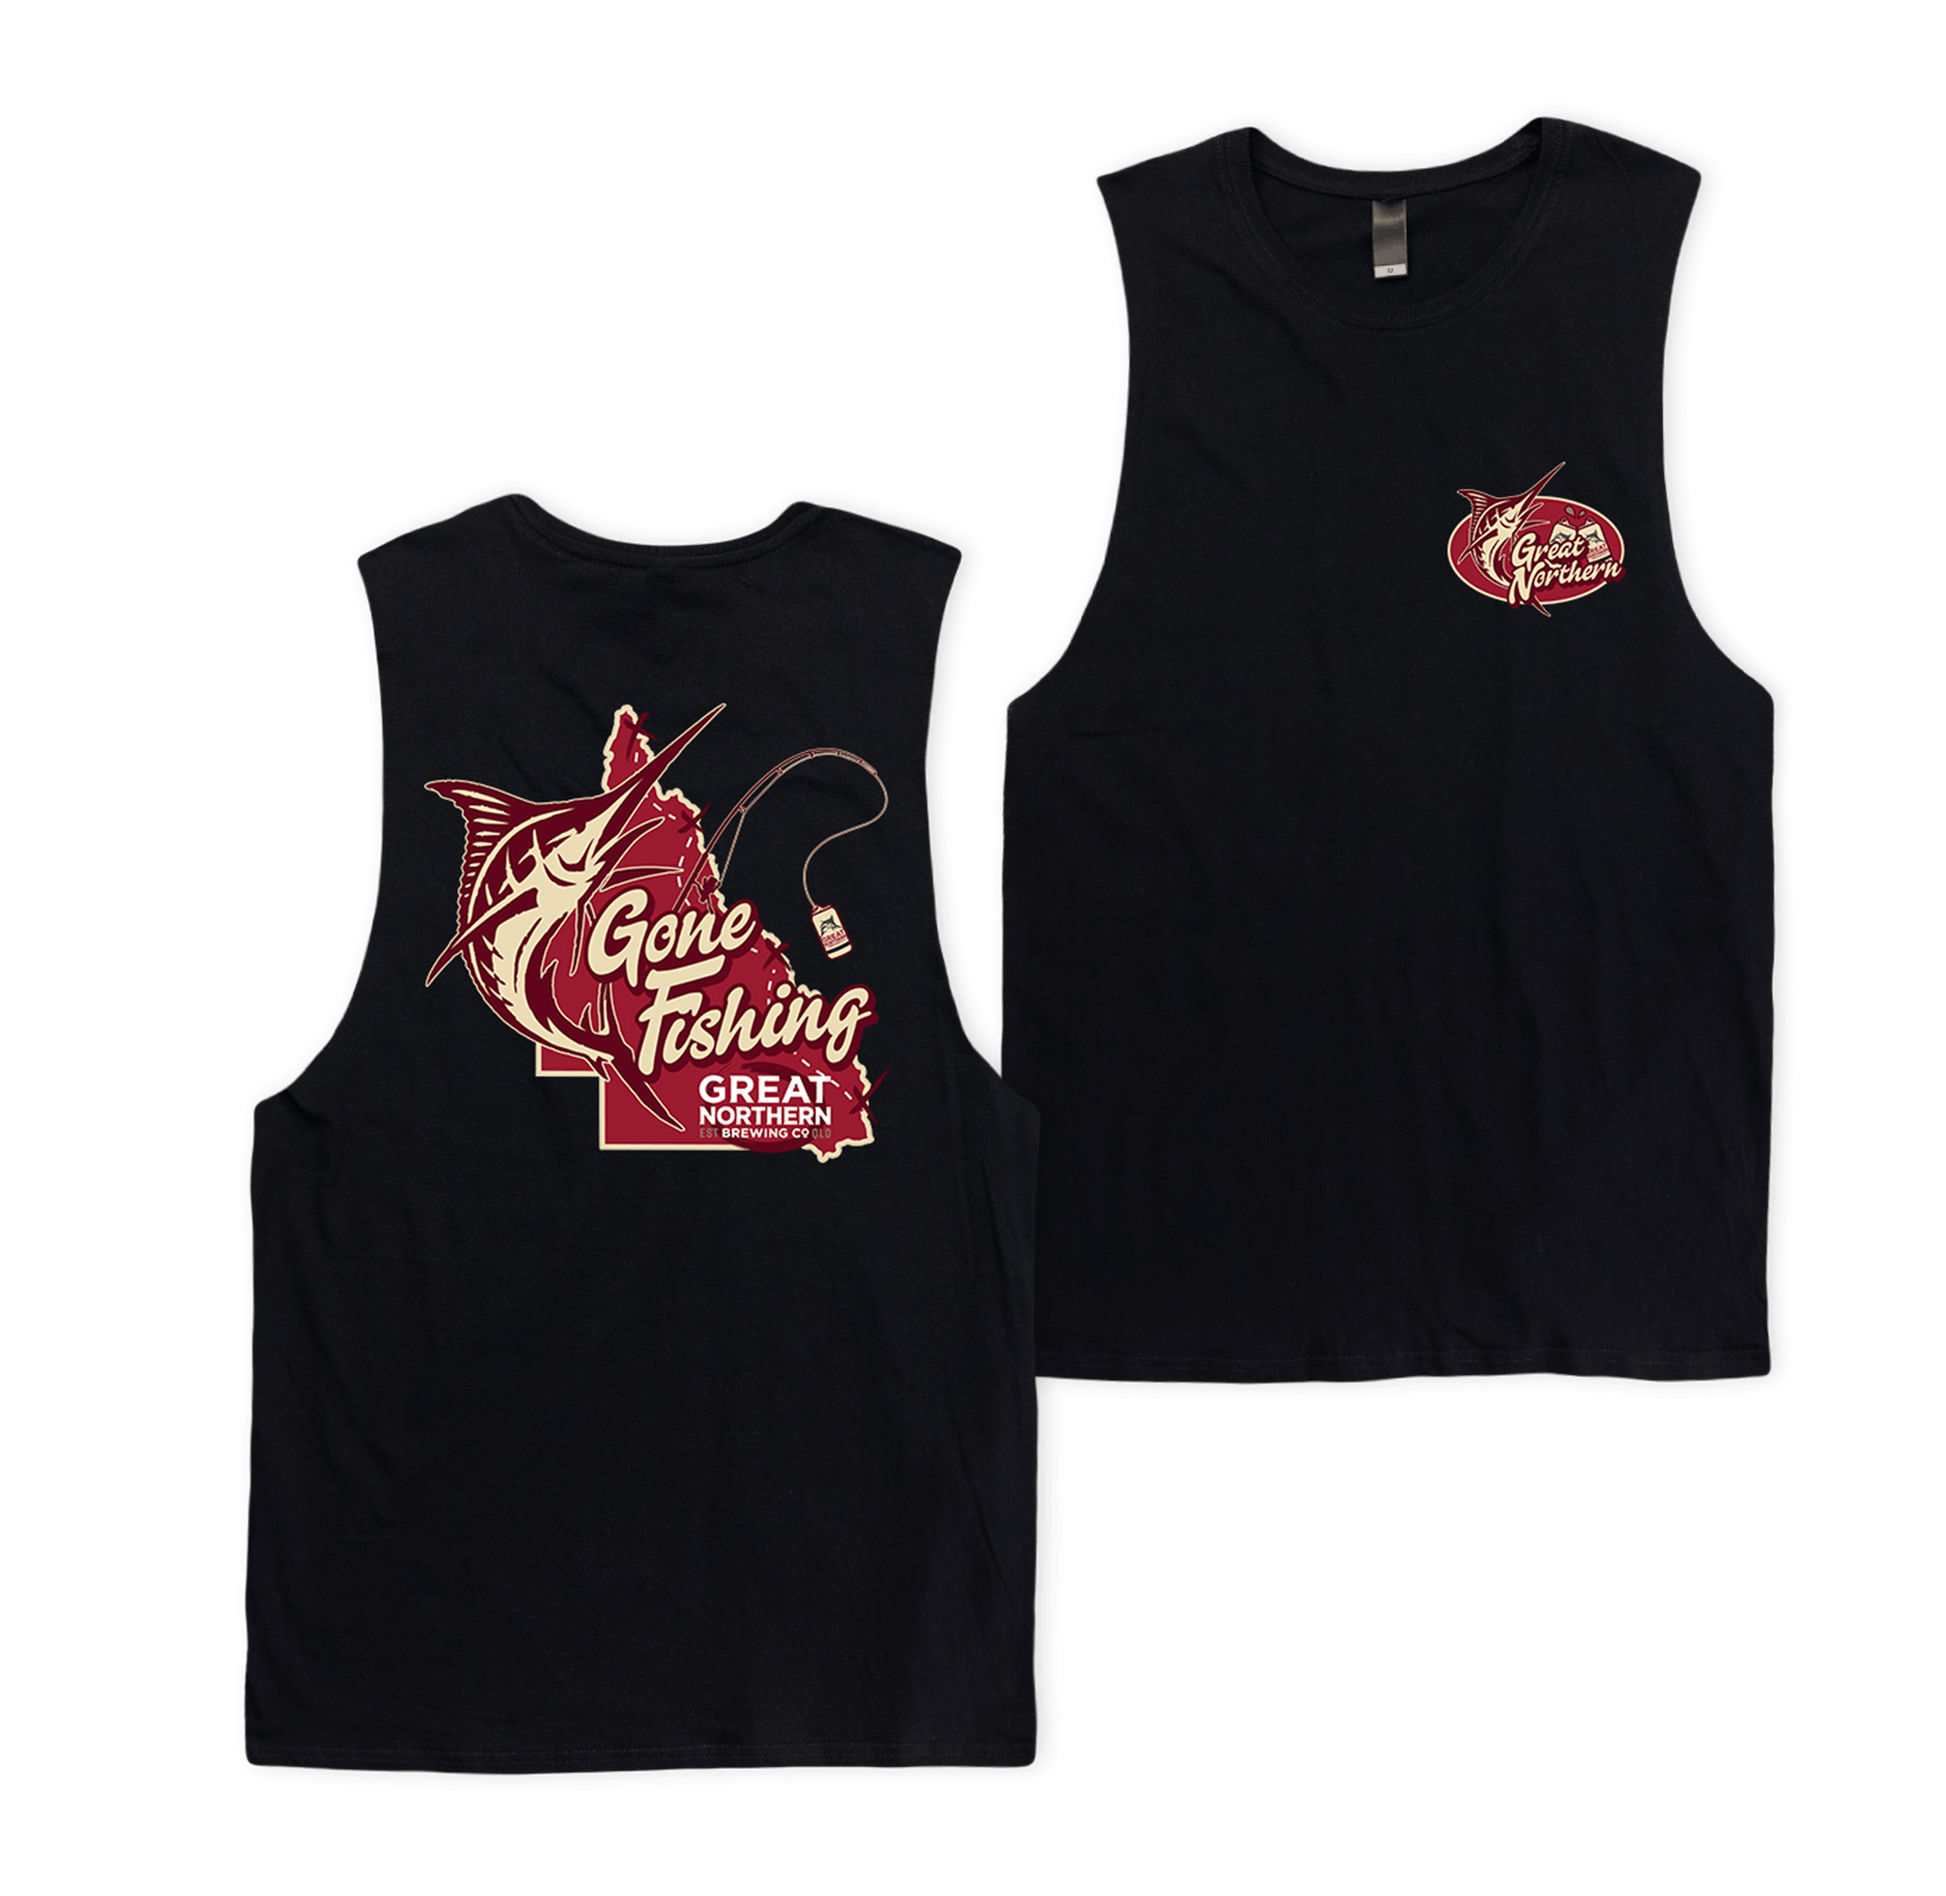 Gone Fishing Muscle Tee Muscle Tanks Great Northern